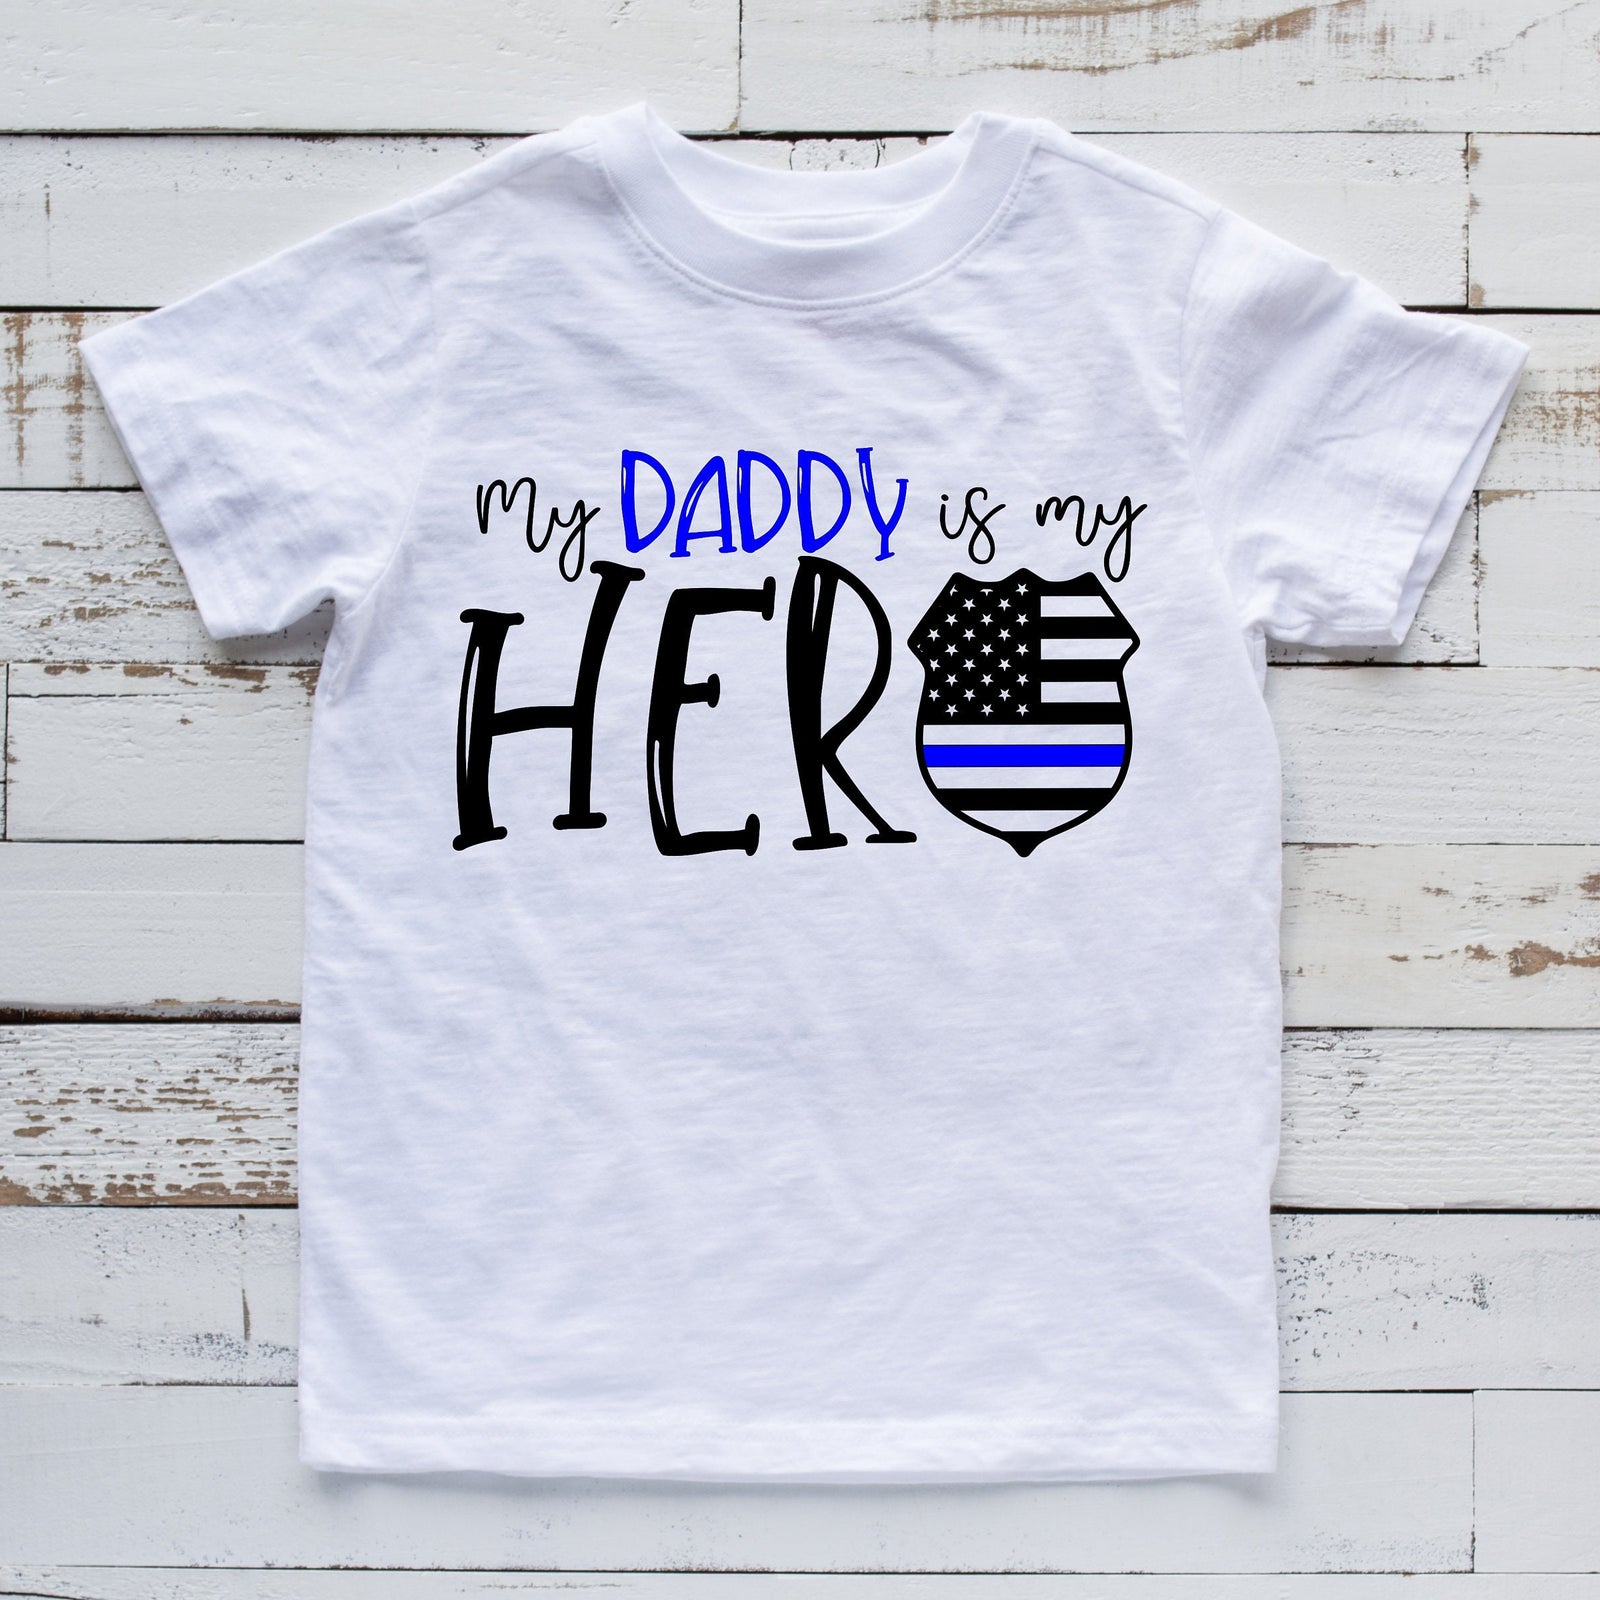 My Daddy is My Hero T Shirt - Police Officer Statement Shirt - Police Officer Kids Shirt - Police Daddy Shirt